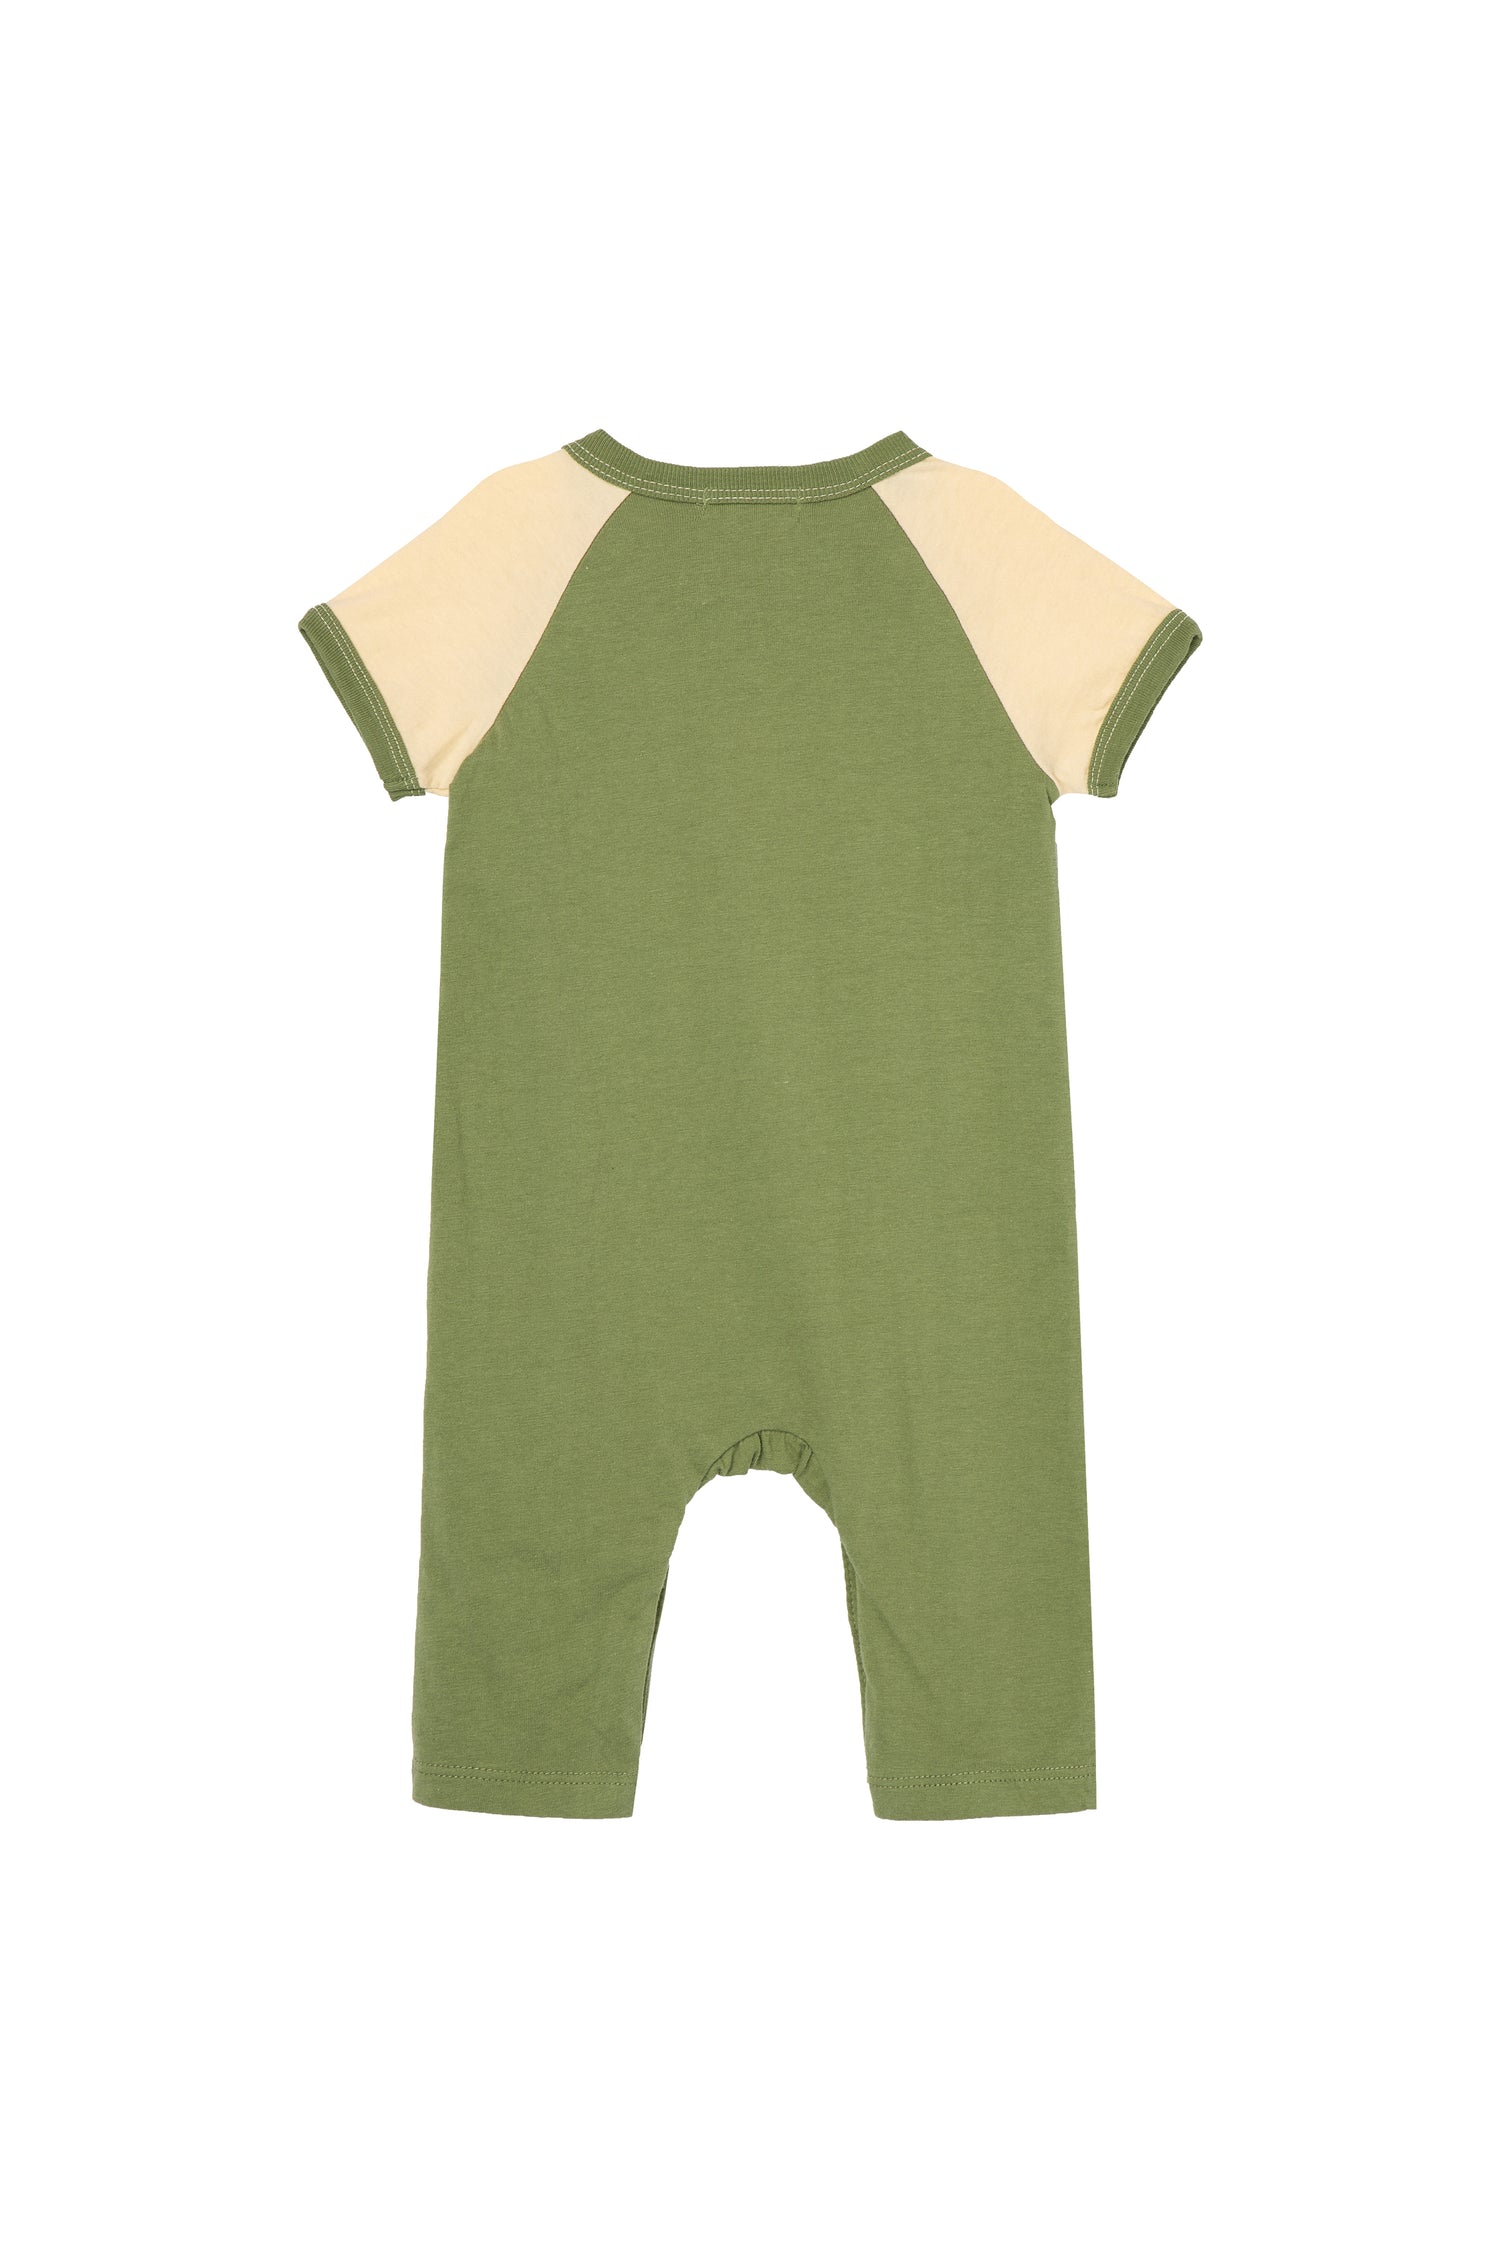 Back of green and off-white onesie